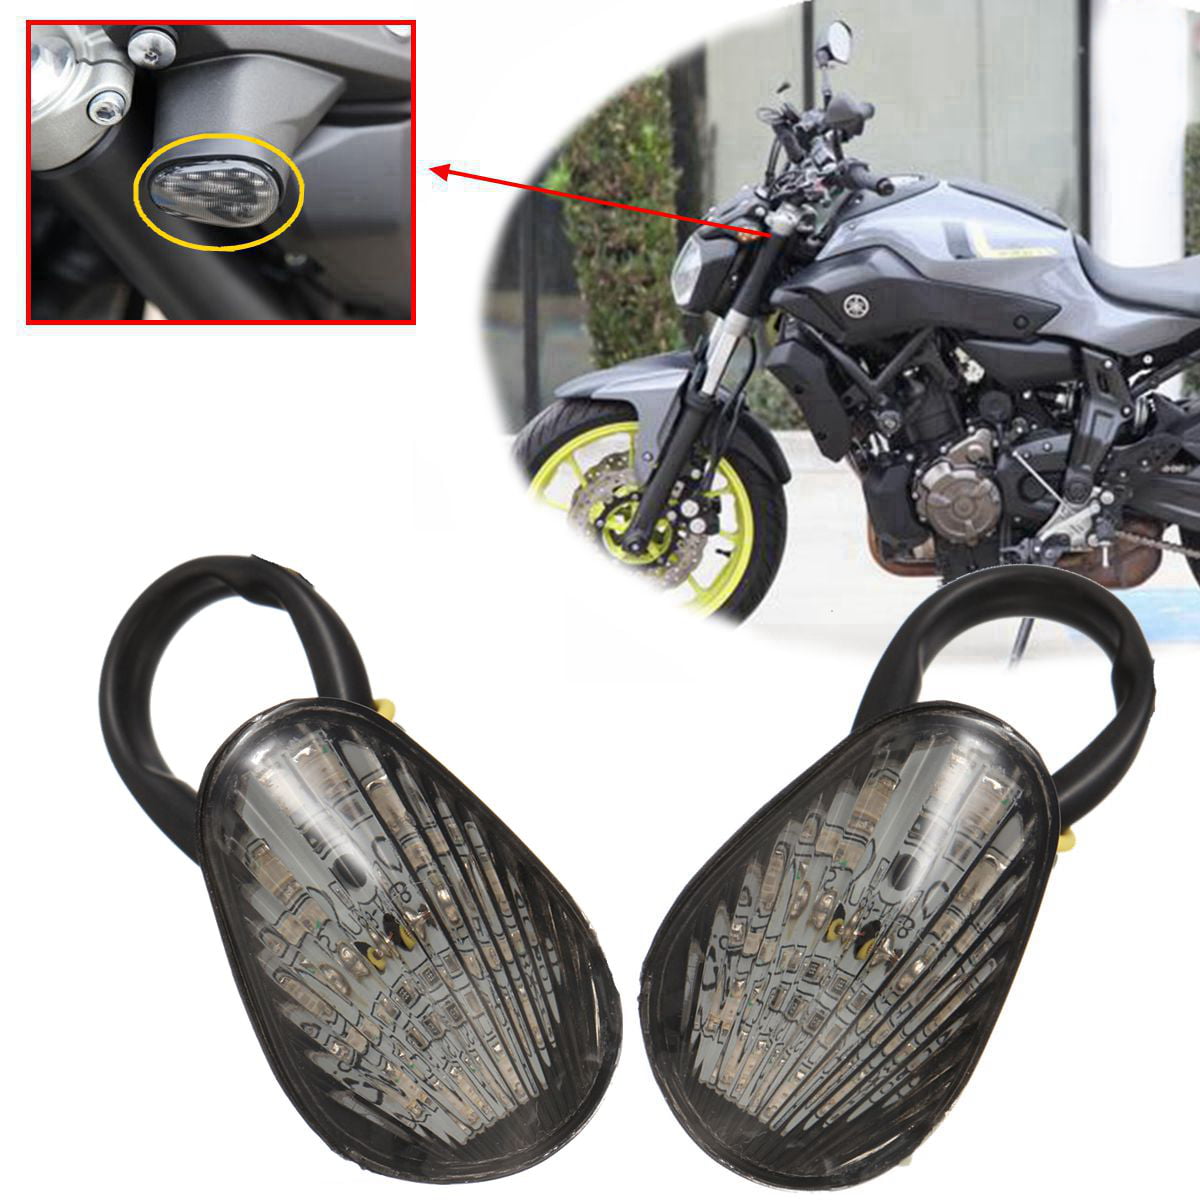 LED Headlight Assembly kit Replacement for 2014 2015 2016 2017 YAMAHA FZ-07 